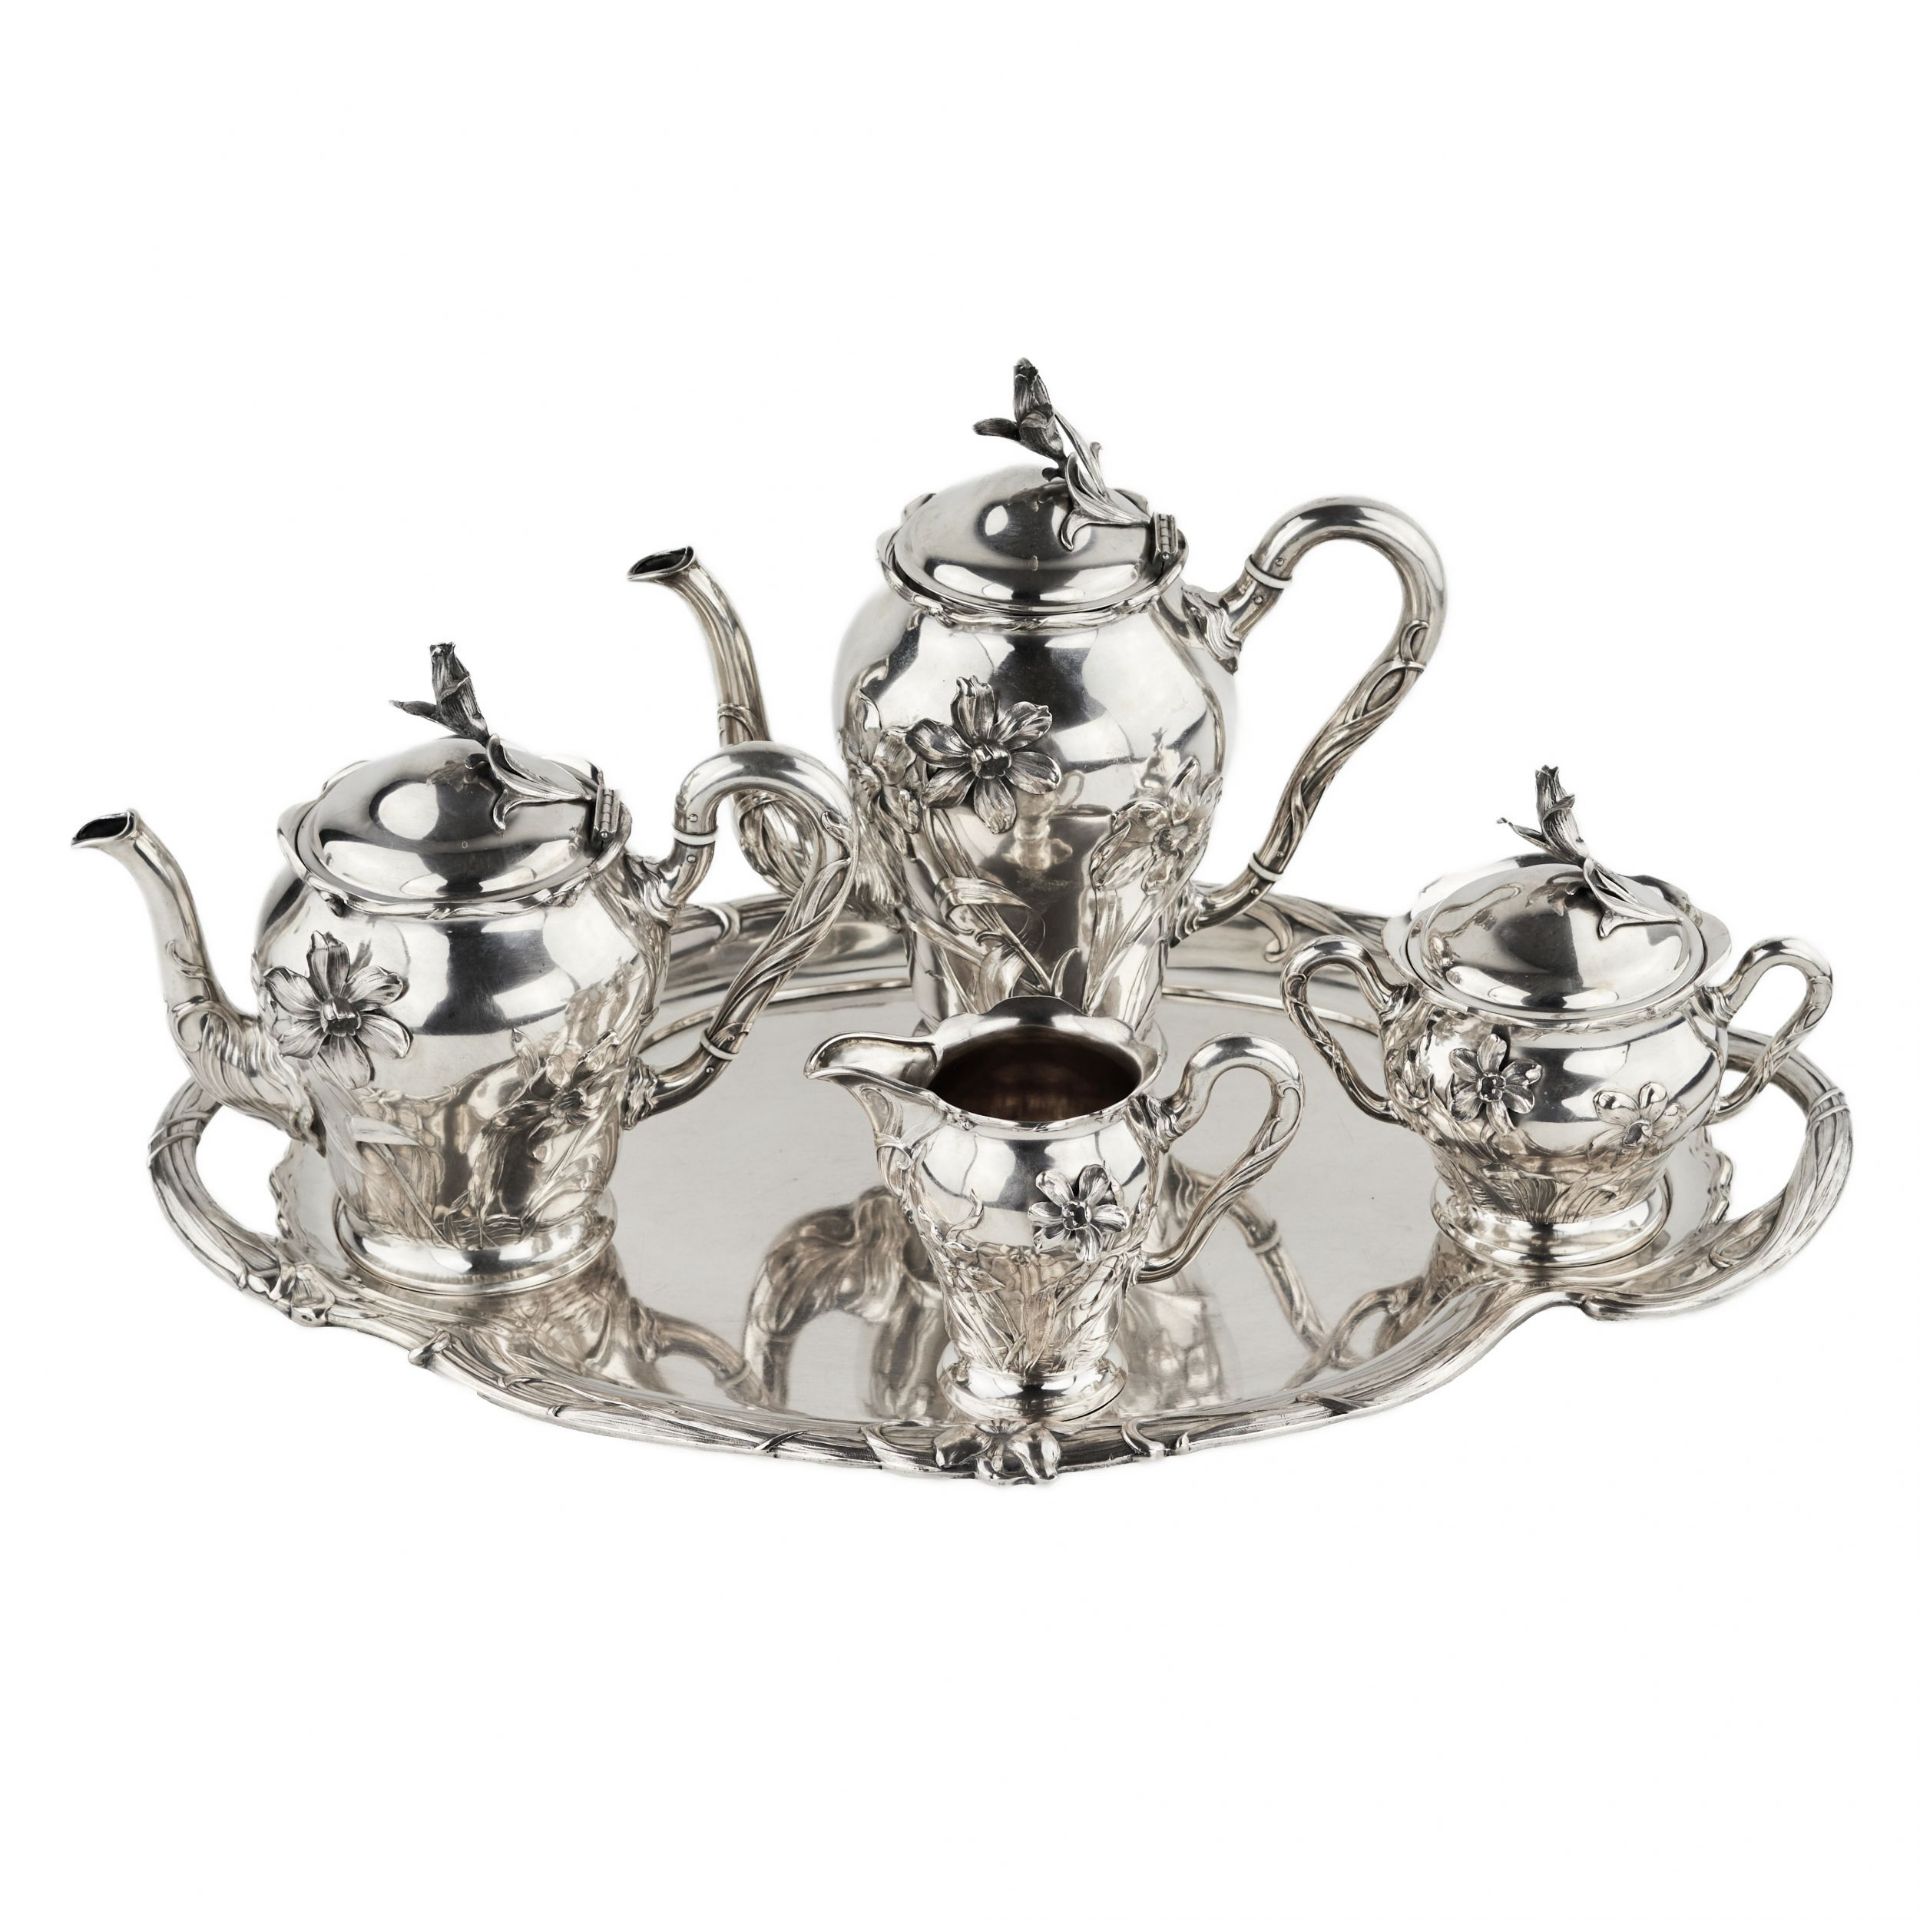 Silver tea and coffee service in Art Nouveau style. Bruckmann. After 1888. - Image 2 of 13